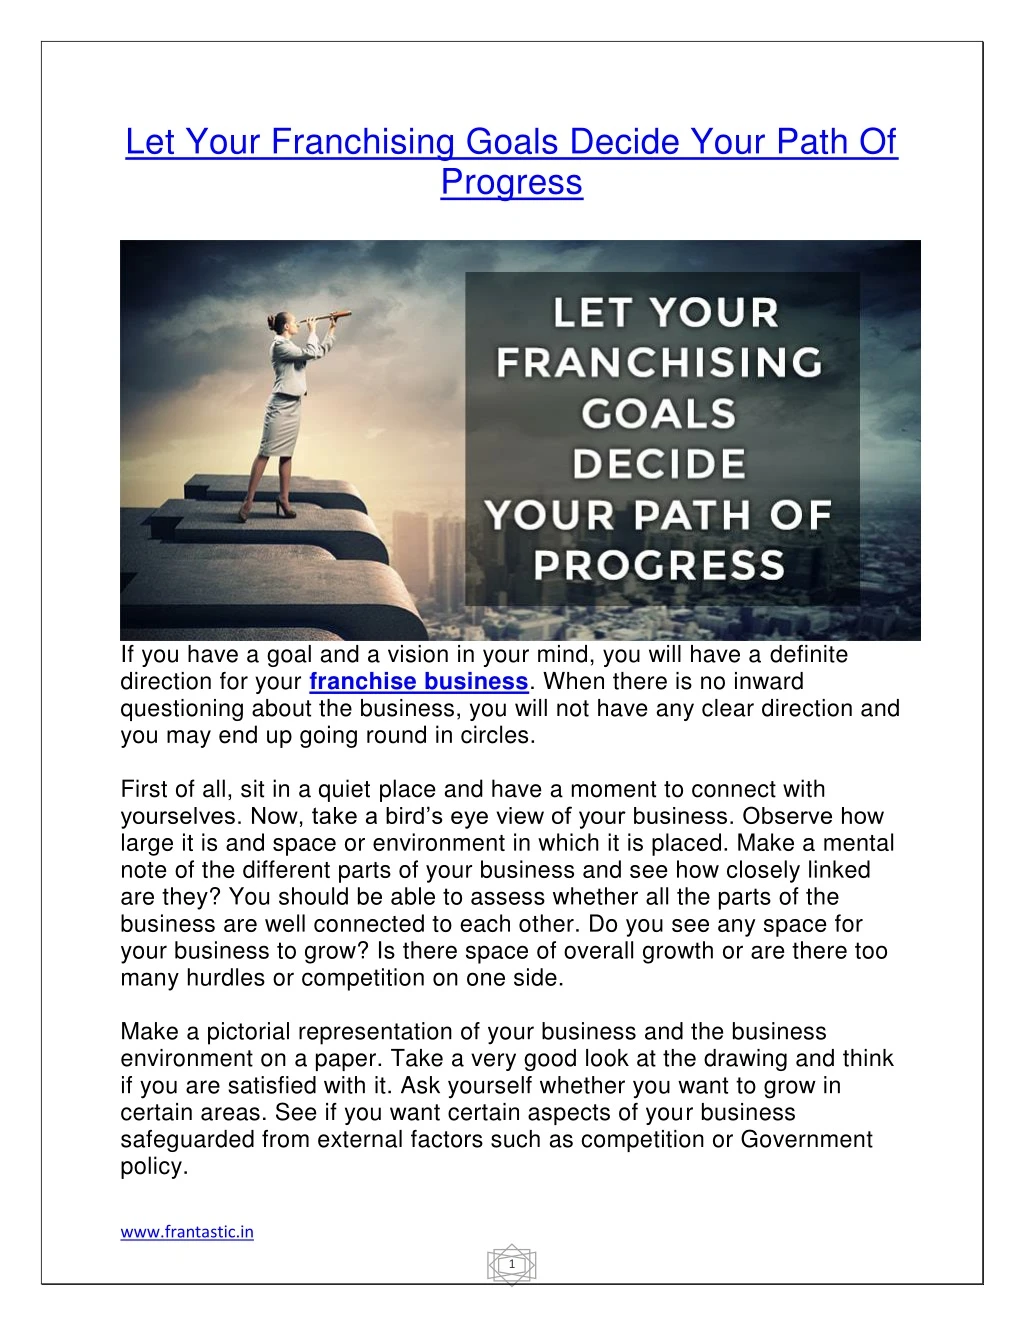 let your franchising goals decide your path